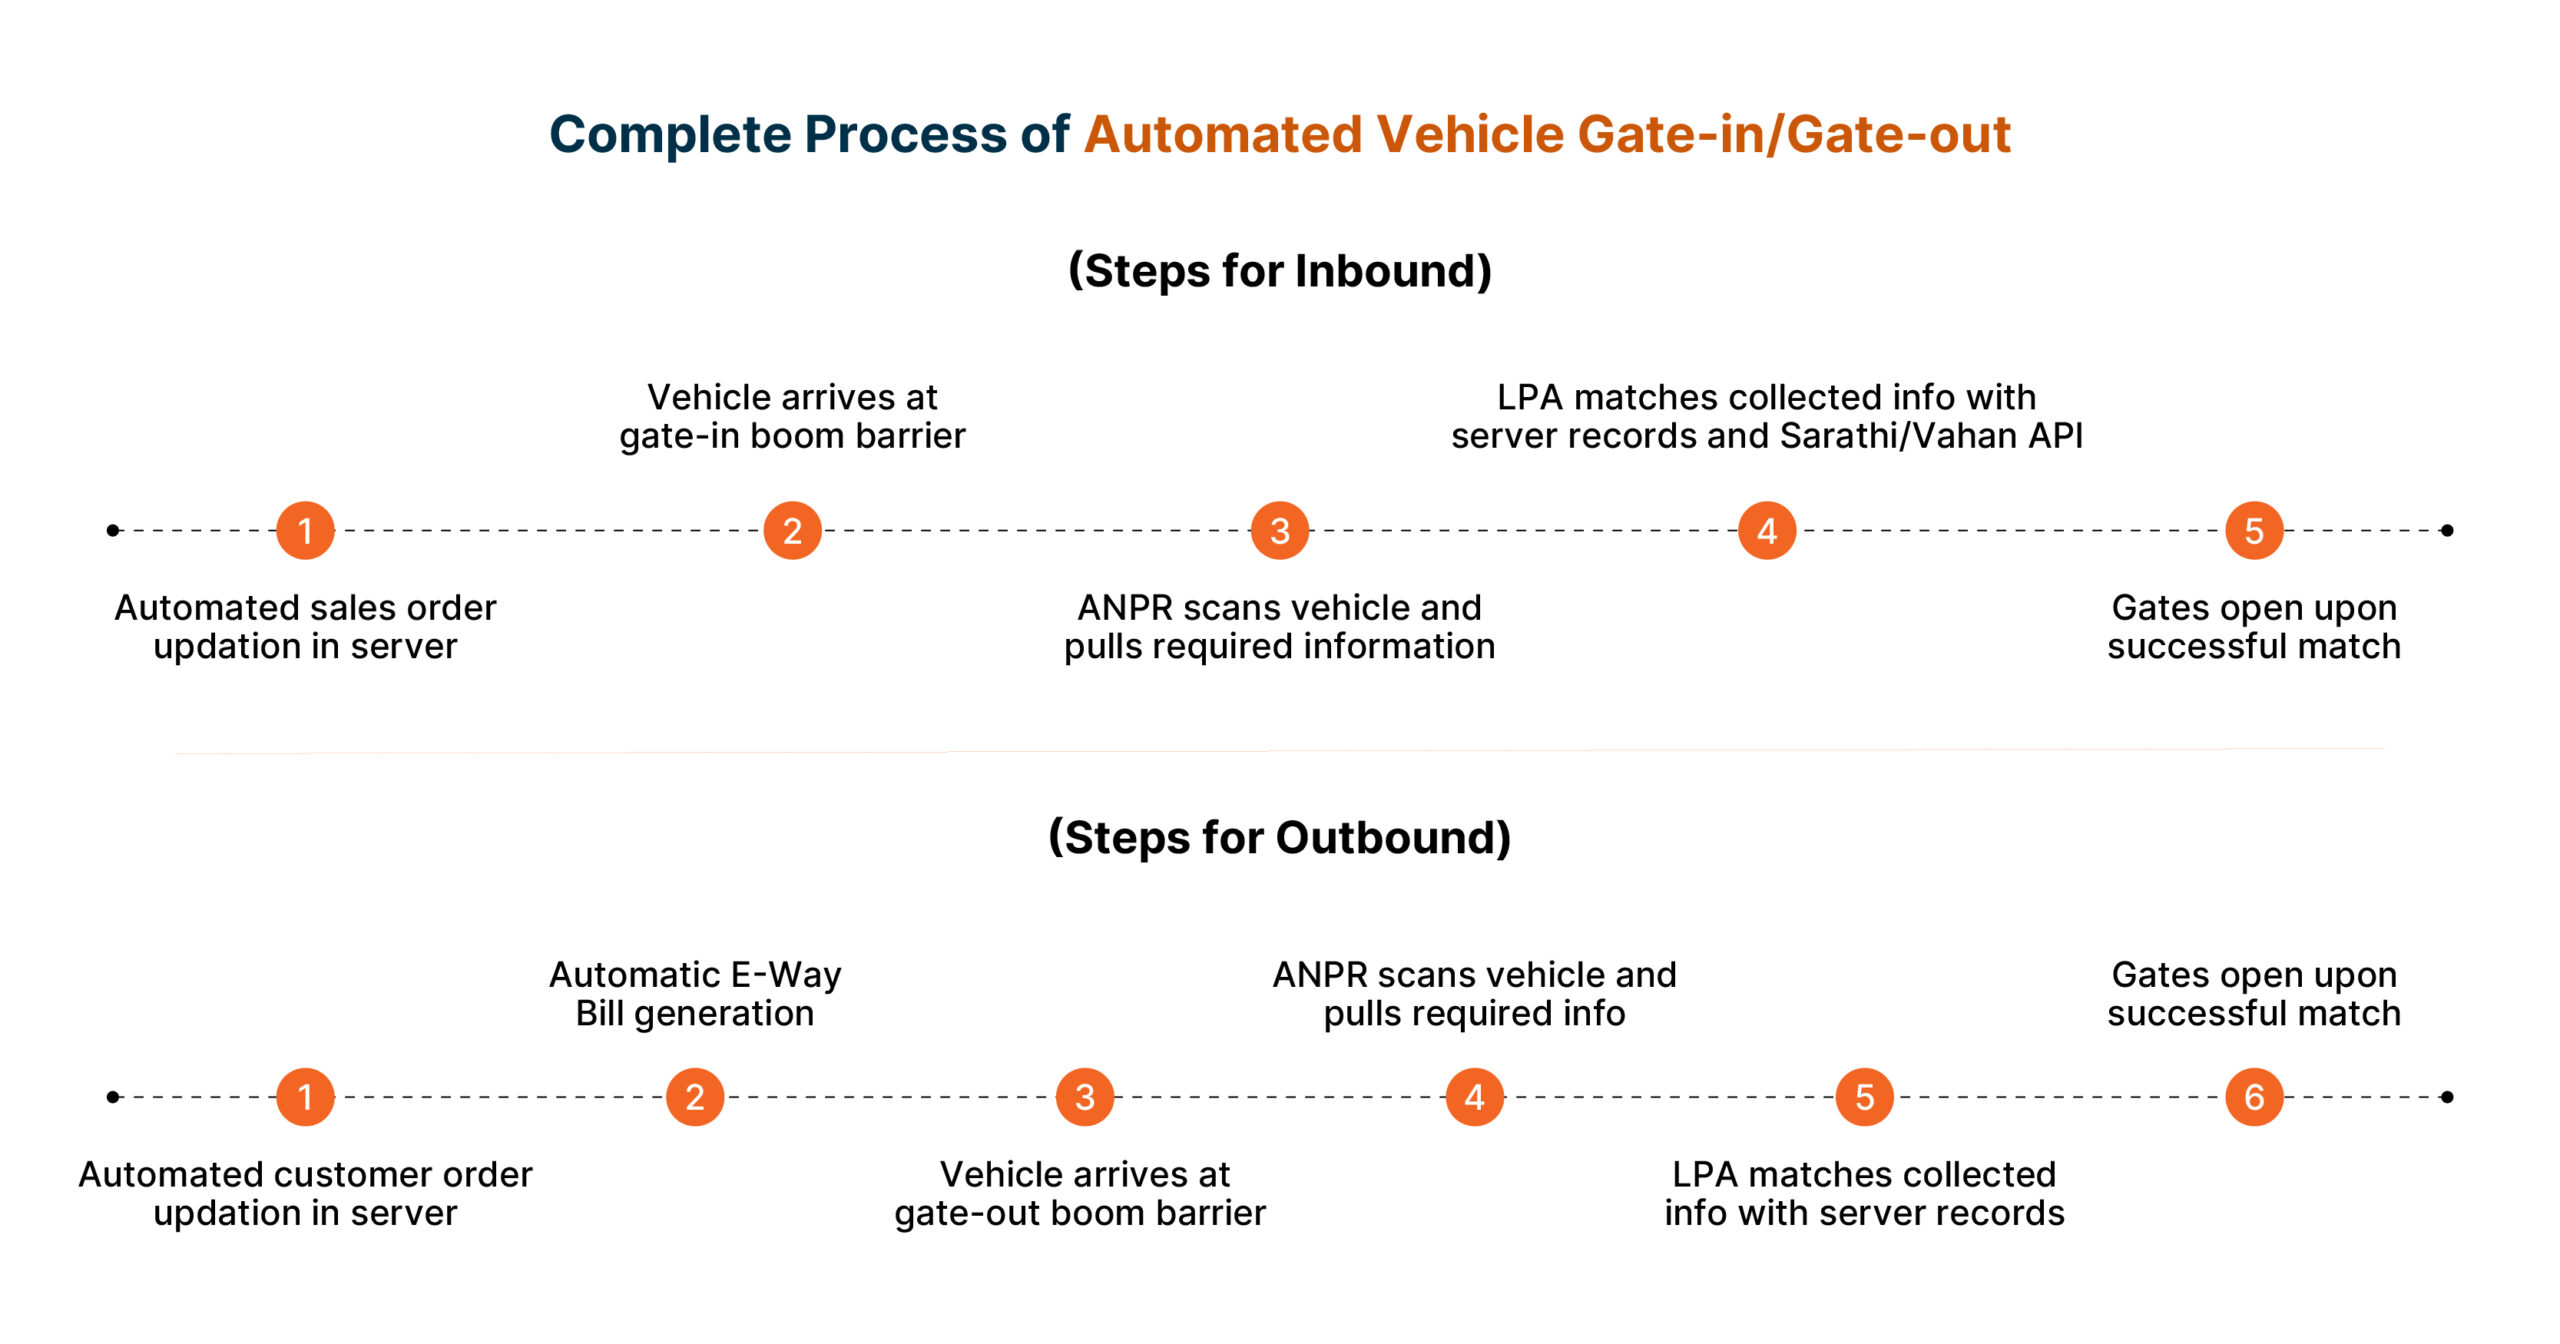 Complete process of automated vehicle verification for inbound and outbound logistics